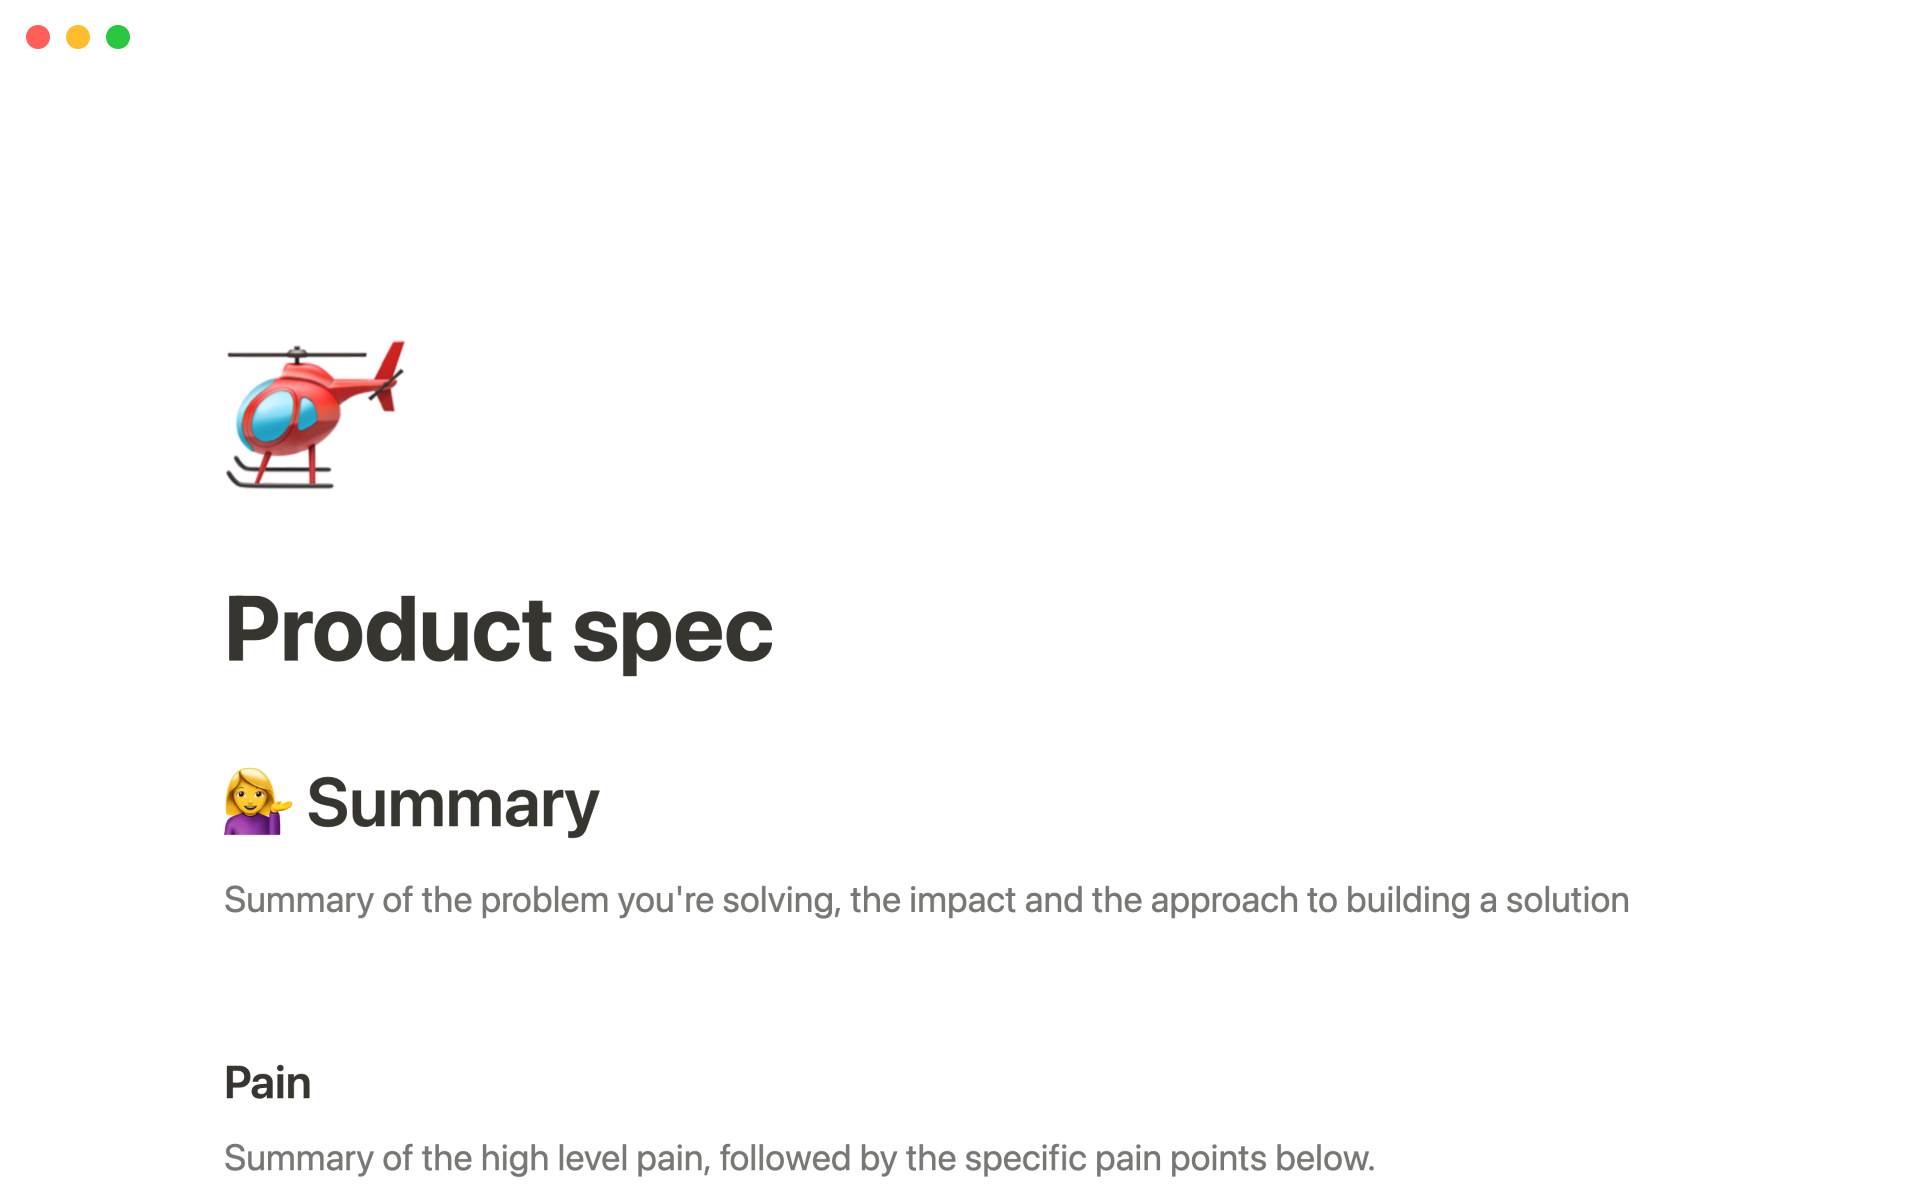 The desktop image for the Product spec template